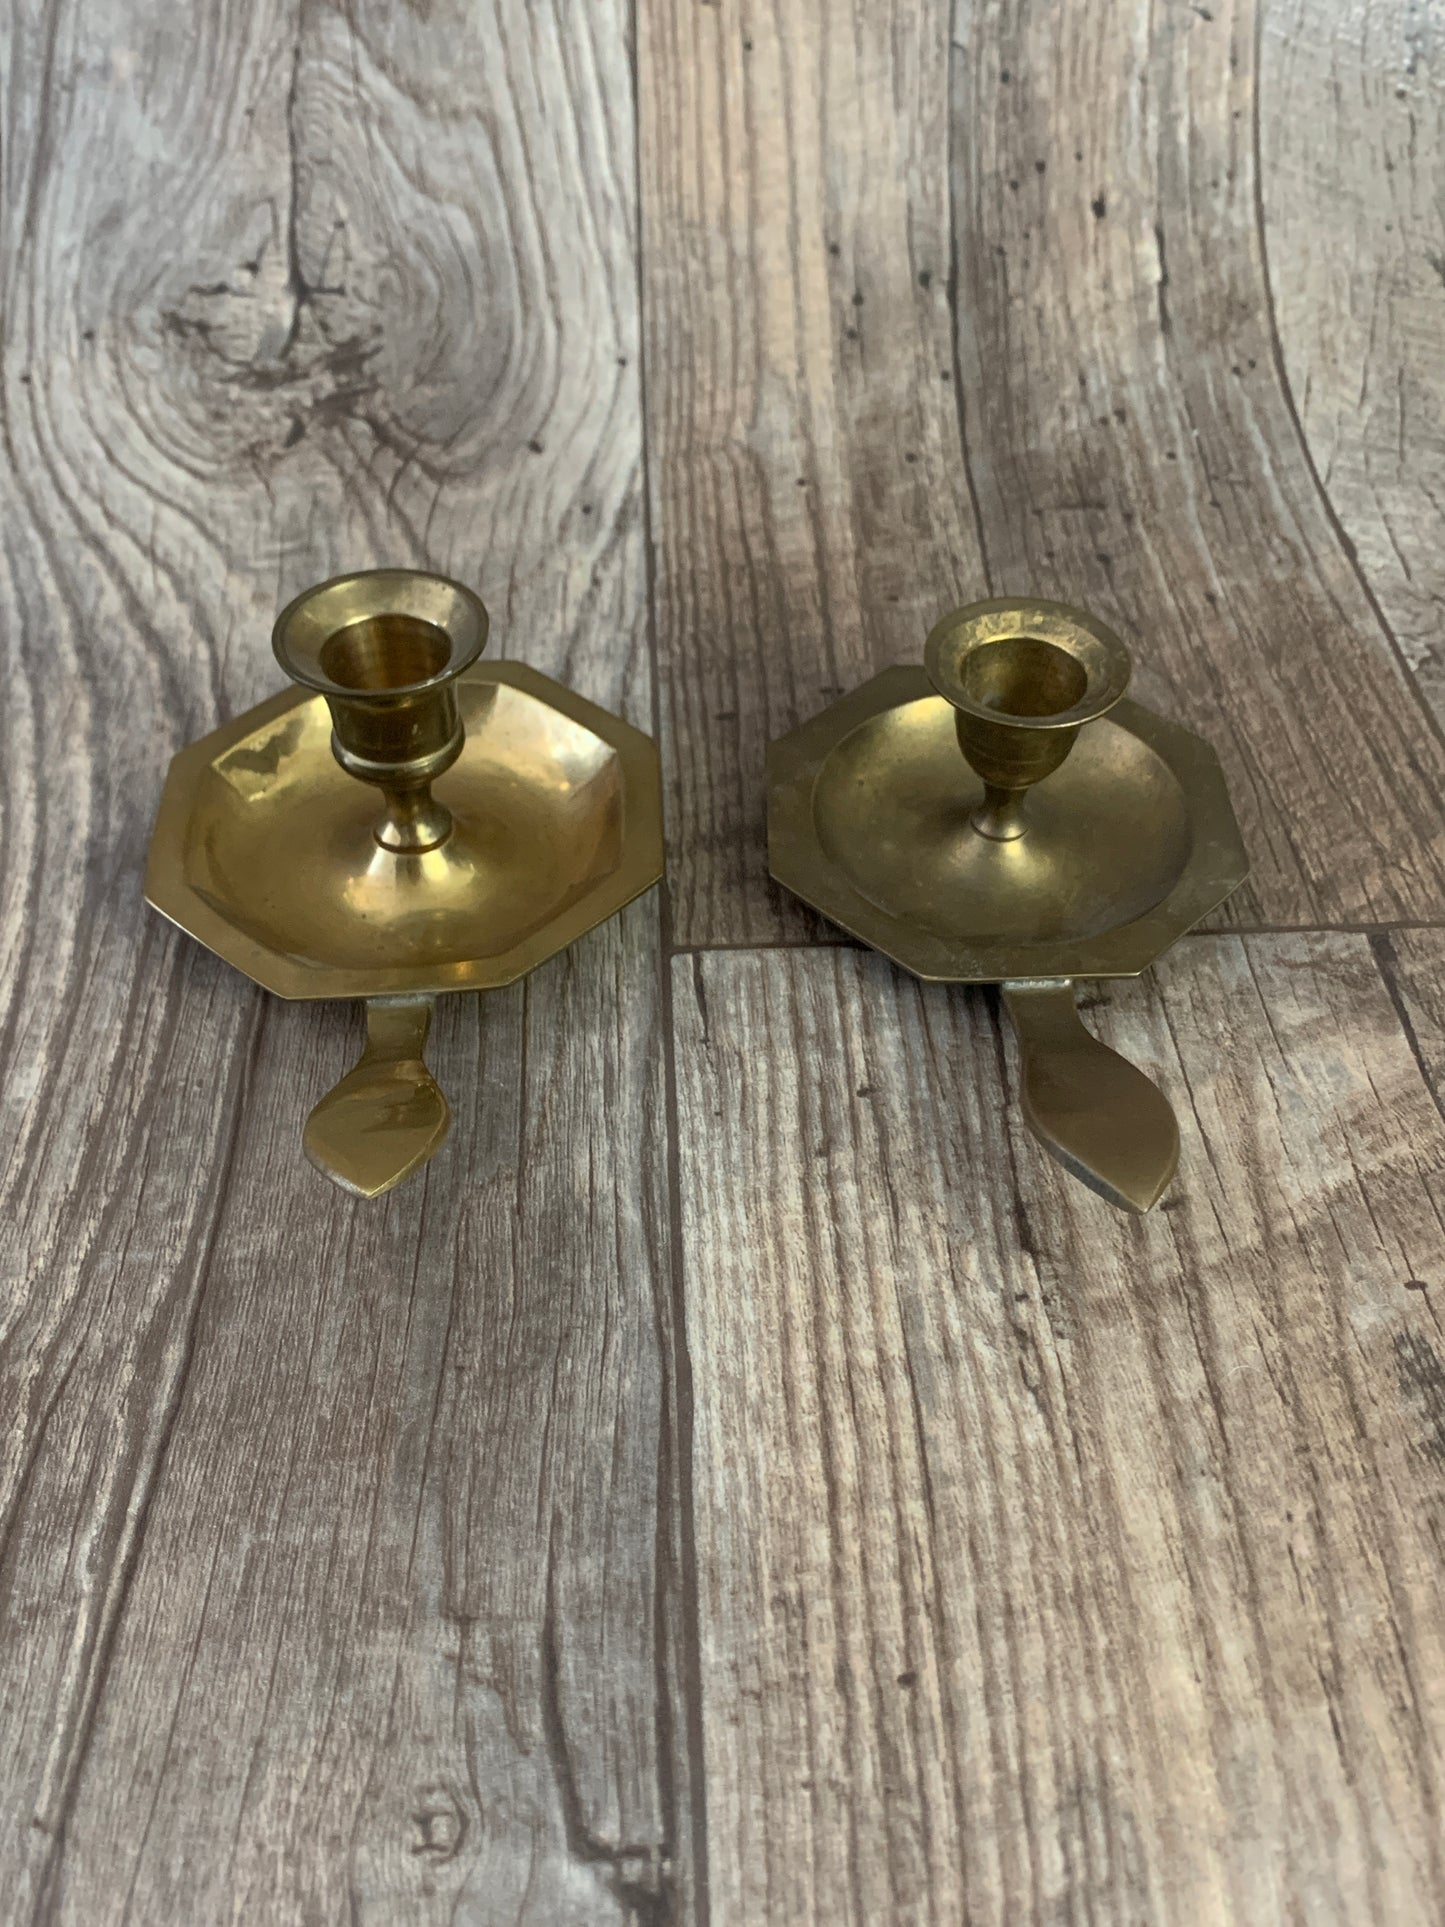 Pair of Brass Candlestick Holders with Handle Vintage Brass Home Decor